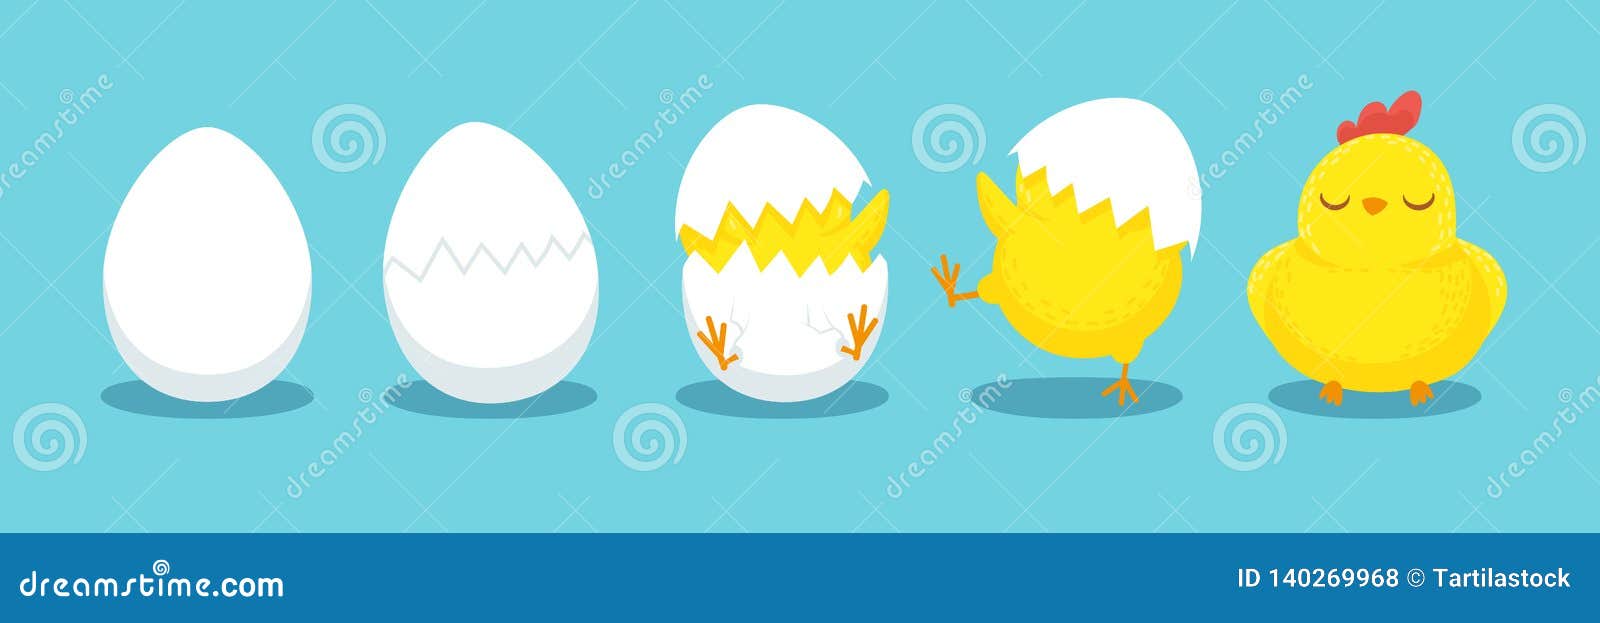 chicken hatching. cracked chick egg, hatch eggs and hatched easter chicks cartoon  